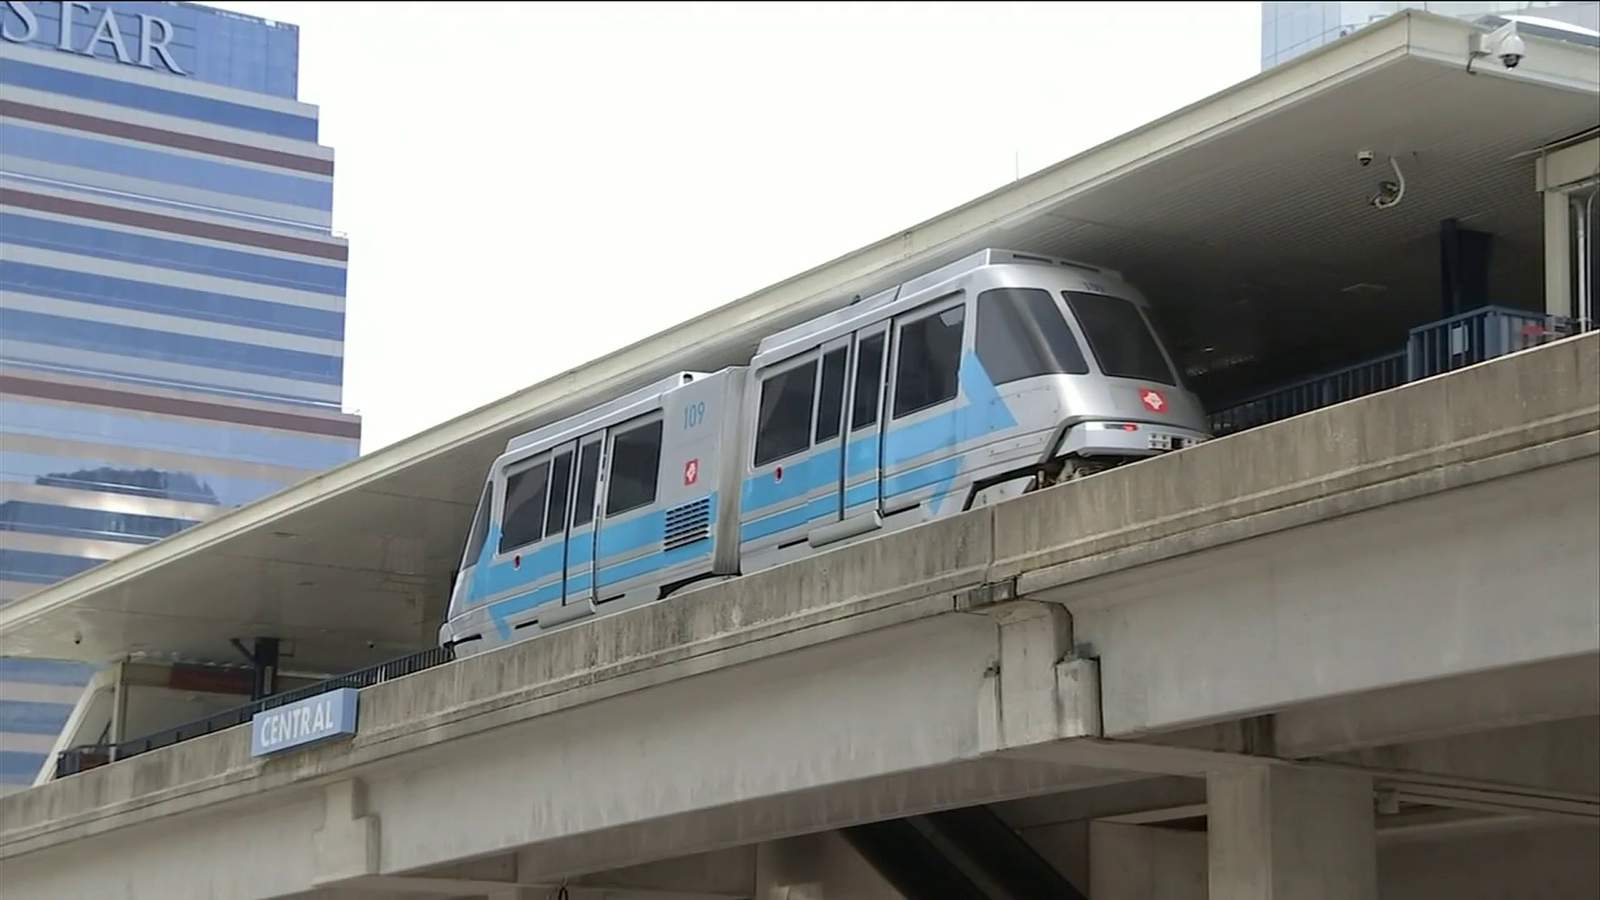 Driverless cars could be included in proposed Skyway extension